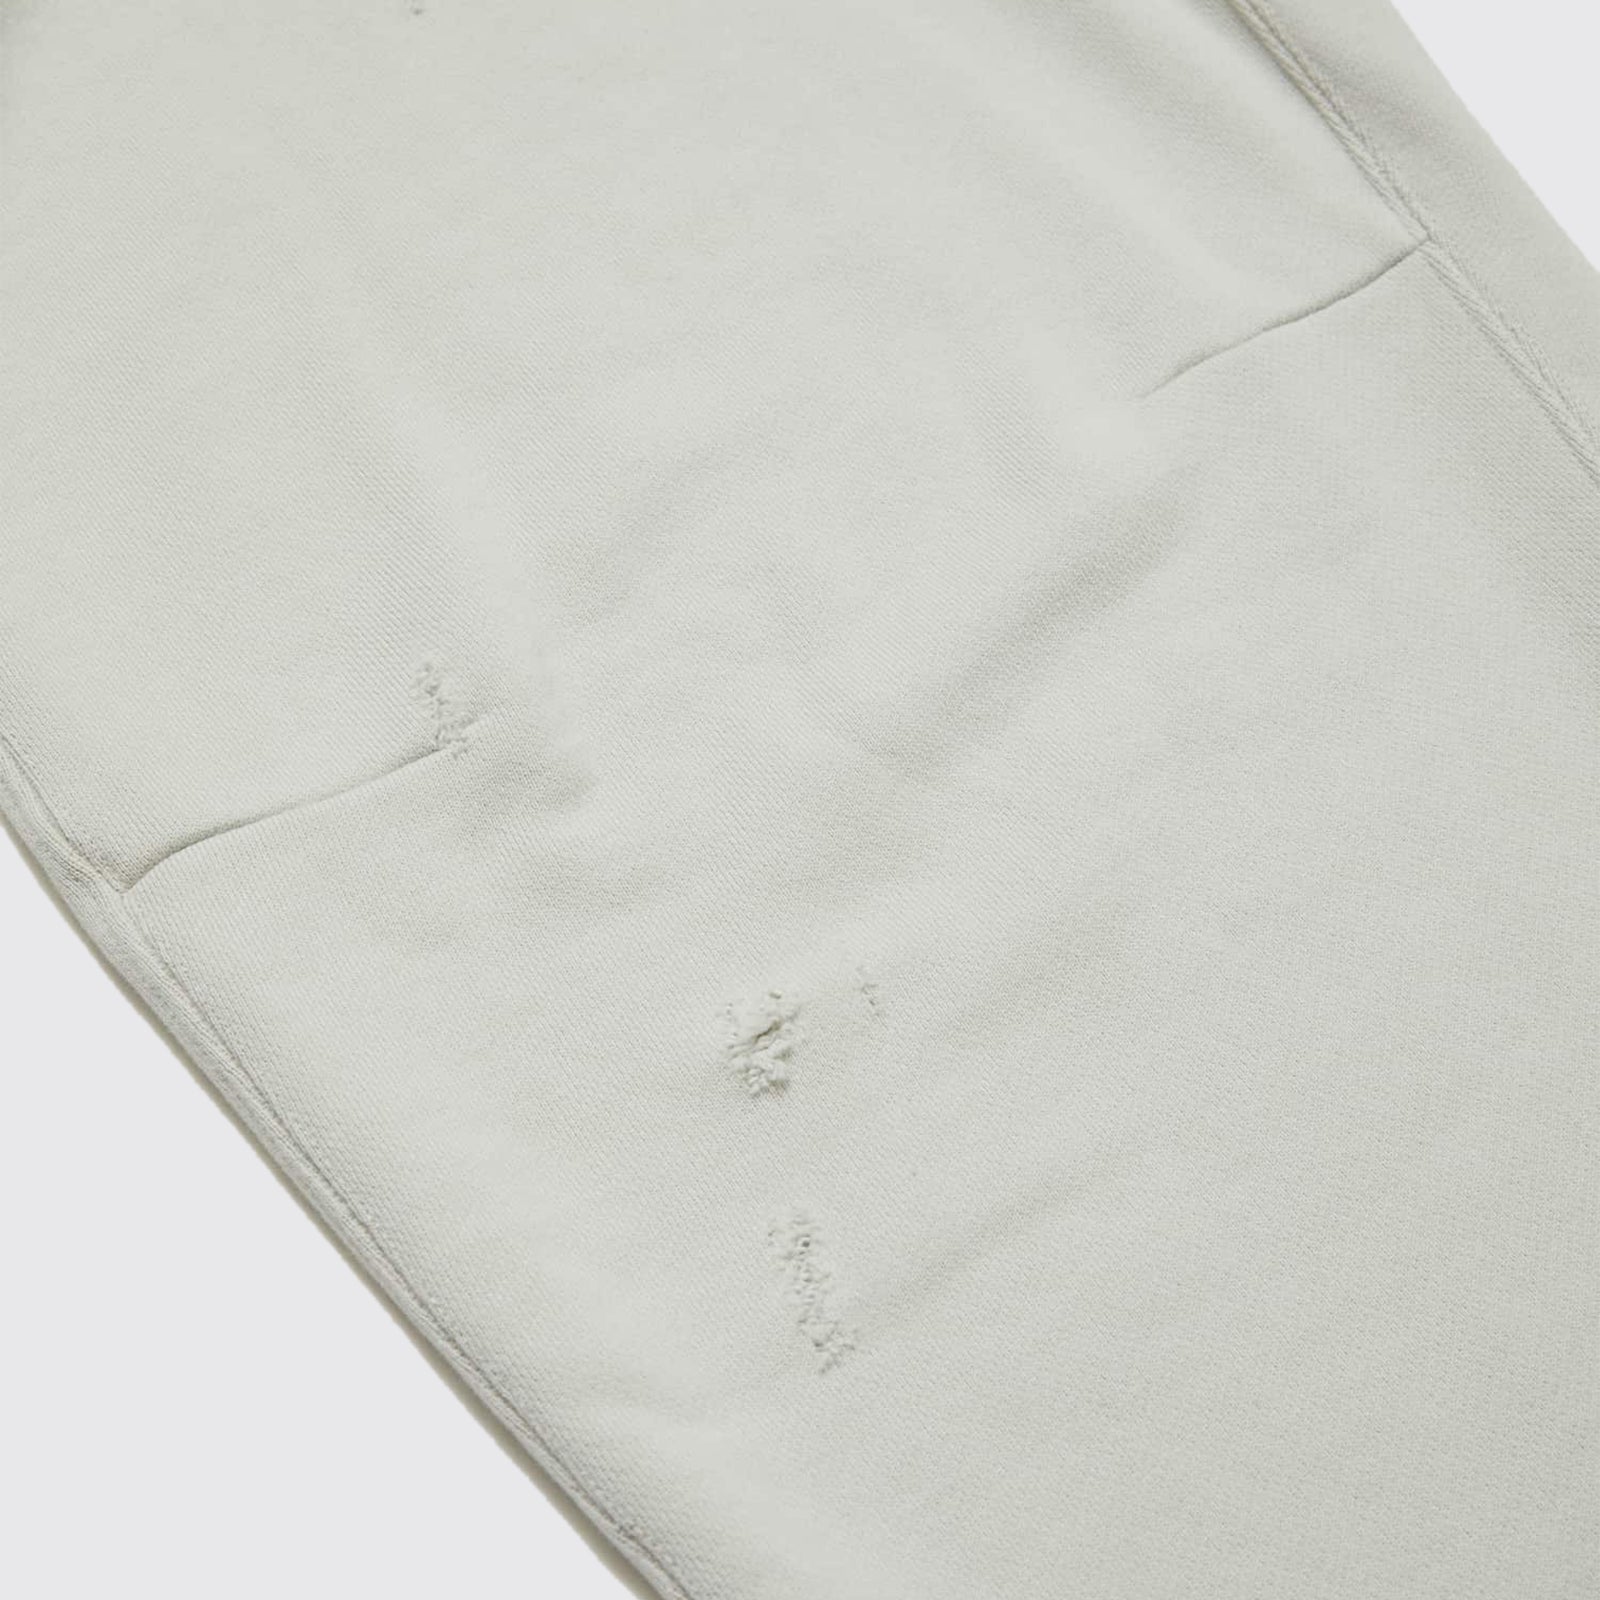 BAL / RUSSELL ATHLETIC  HIGH COTTON DISTRESSED  SWEATPANT